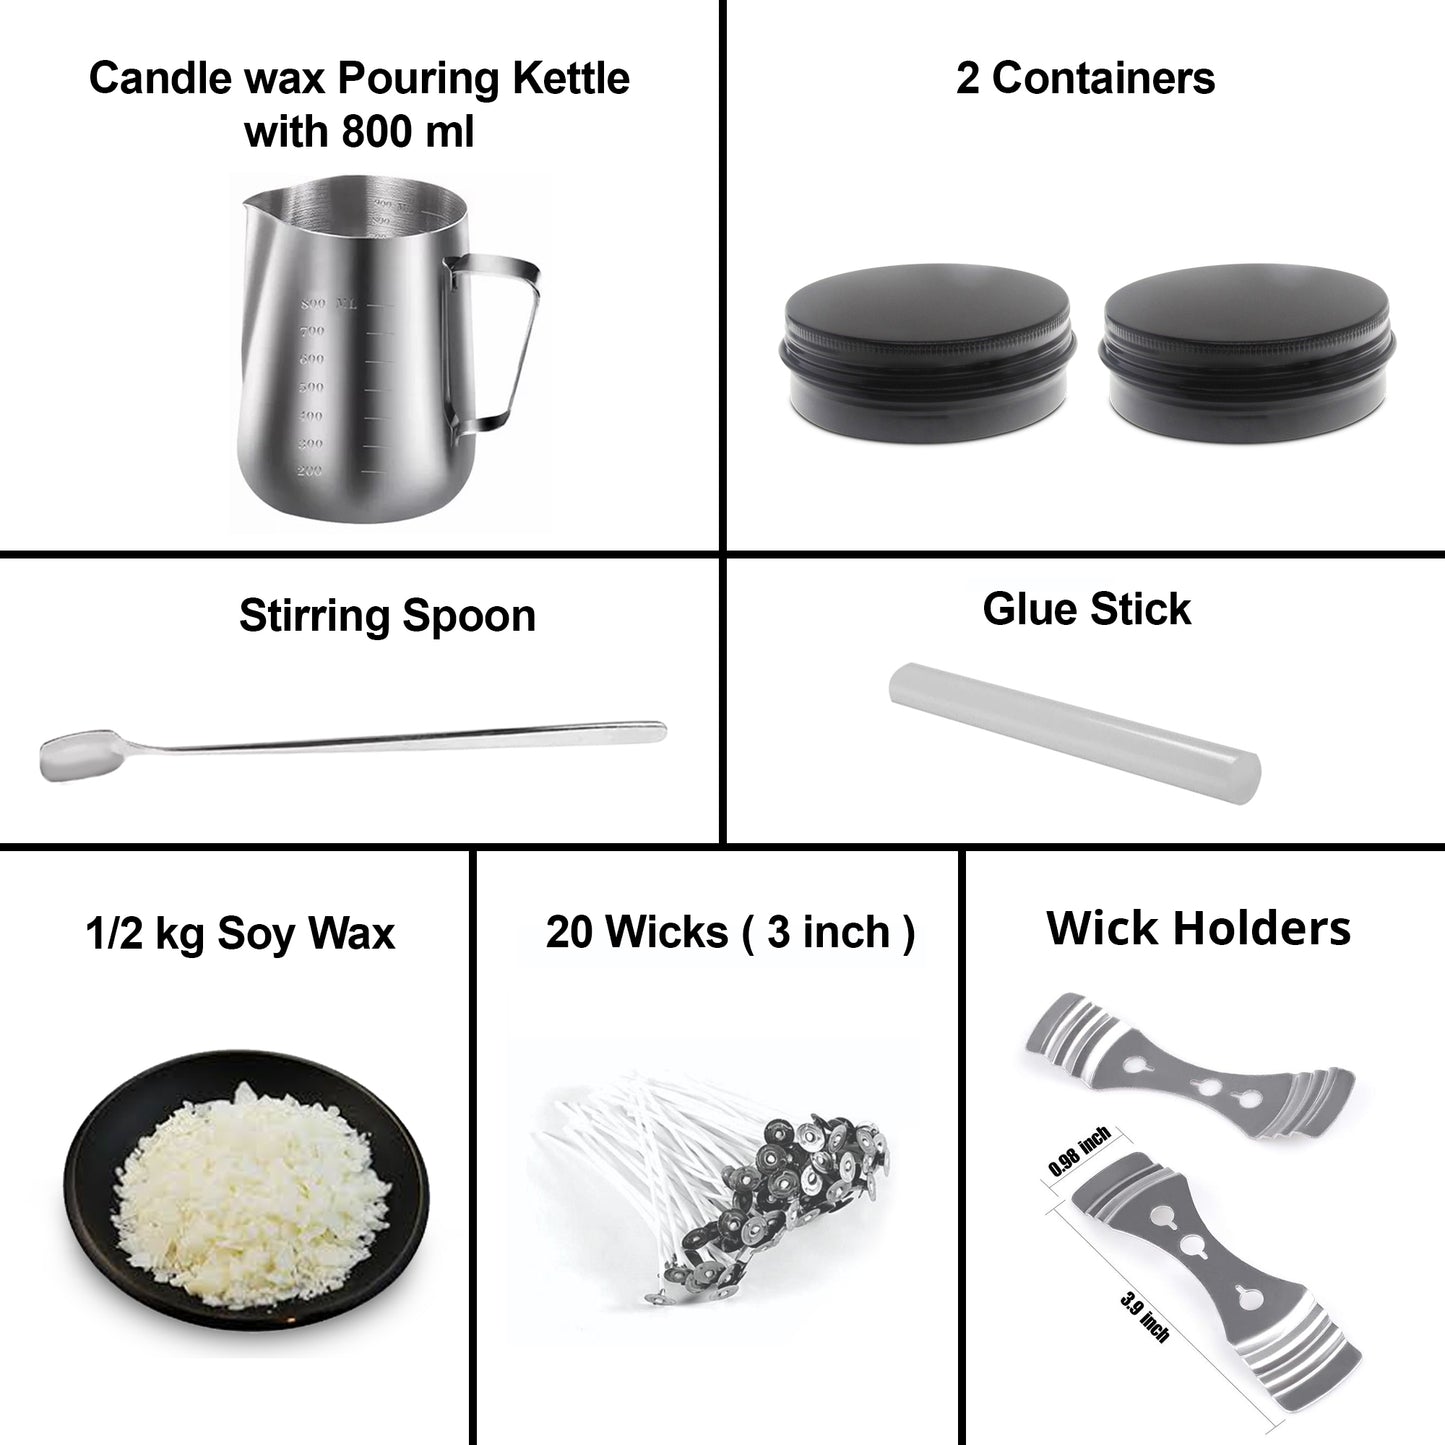 AuraDecor Candle Making Kit for DIY Projects